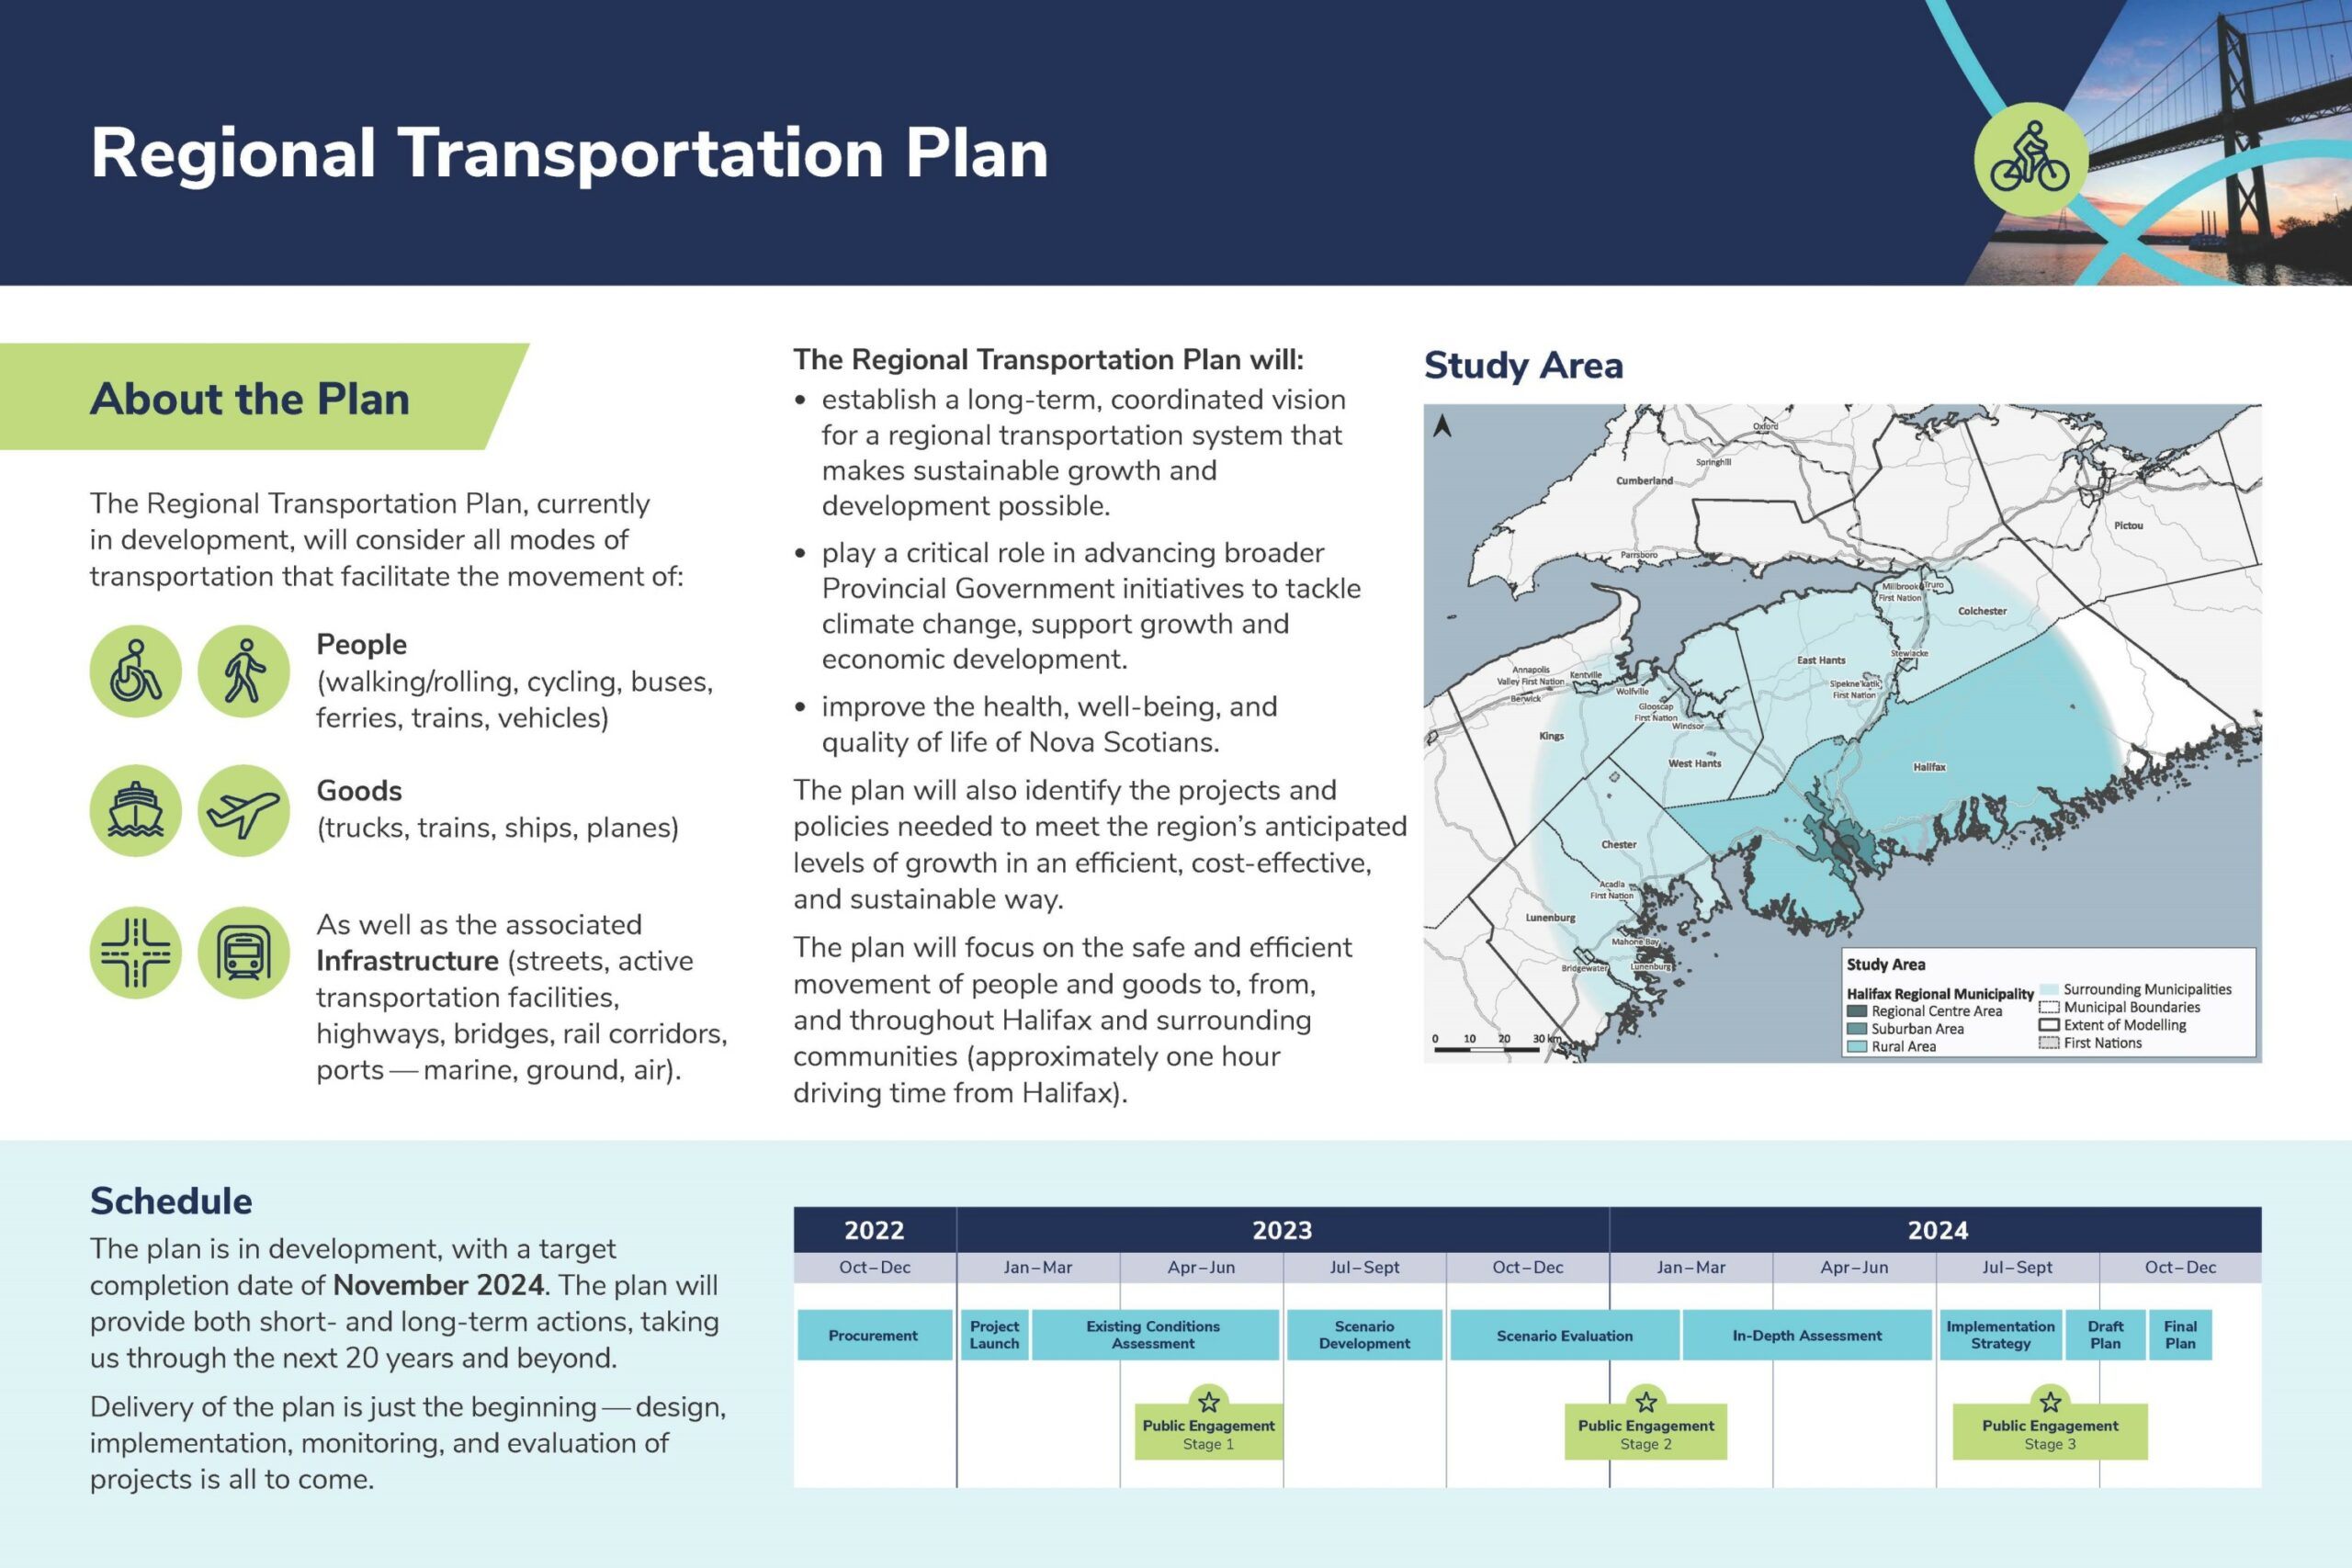 Regional Transportation Plan About the Plan The Regional Transportation Plan, currently in development, will consider all modes of transportation that facilitate the movement of: People (walking/rolling, cycling, buses, ferries, trains, vehicles) Goods (trucks, trains, ships, planes) As well as the associated Infrastructure (streets, active transportation facilities, highways, bridges, rail corridors, ports — marine, ground, air). The Regional Transportation Plan will: • establish a long-term, coordinated vision for a regional transportation system that makes sustainable growth and development possible. • play a critical role in advancing broader Provincial Government initiatives to tackle climate change, support growth and economic development. • improve the health, well-being, and quality of life of Nova Scotians. The plan will also identify the projects and policies needed to meet the region’s anticipated levels of growth in an efficient, cost-effective, and sustainable way. The plan will focus on the safe and efficient movement of people and goods to, from, and throughout Halifax and surrounding communities (approximately one hour driving time from Halifax). Schedule The plan is in development, with a target completion date of November 2024. The plan will provide both short- and long-term actions, taking us through the next 20 years and beyond. Delivery of the plan is just the beginning- design, implementation and monitoring is all to come.